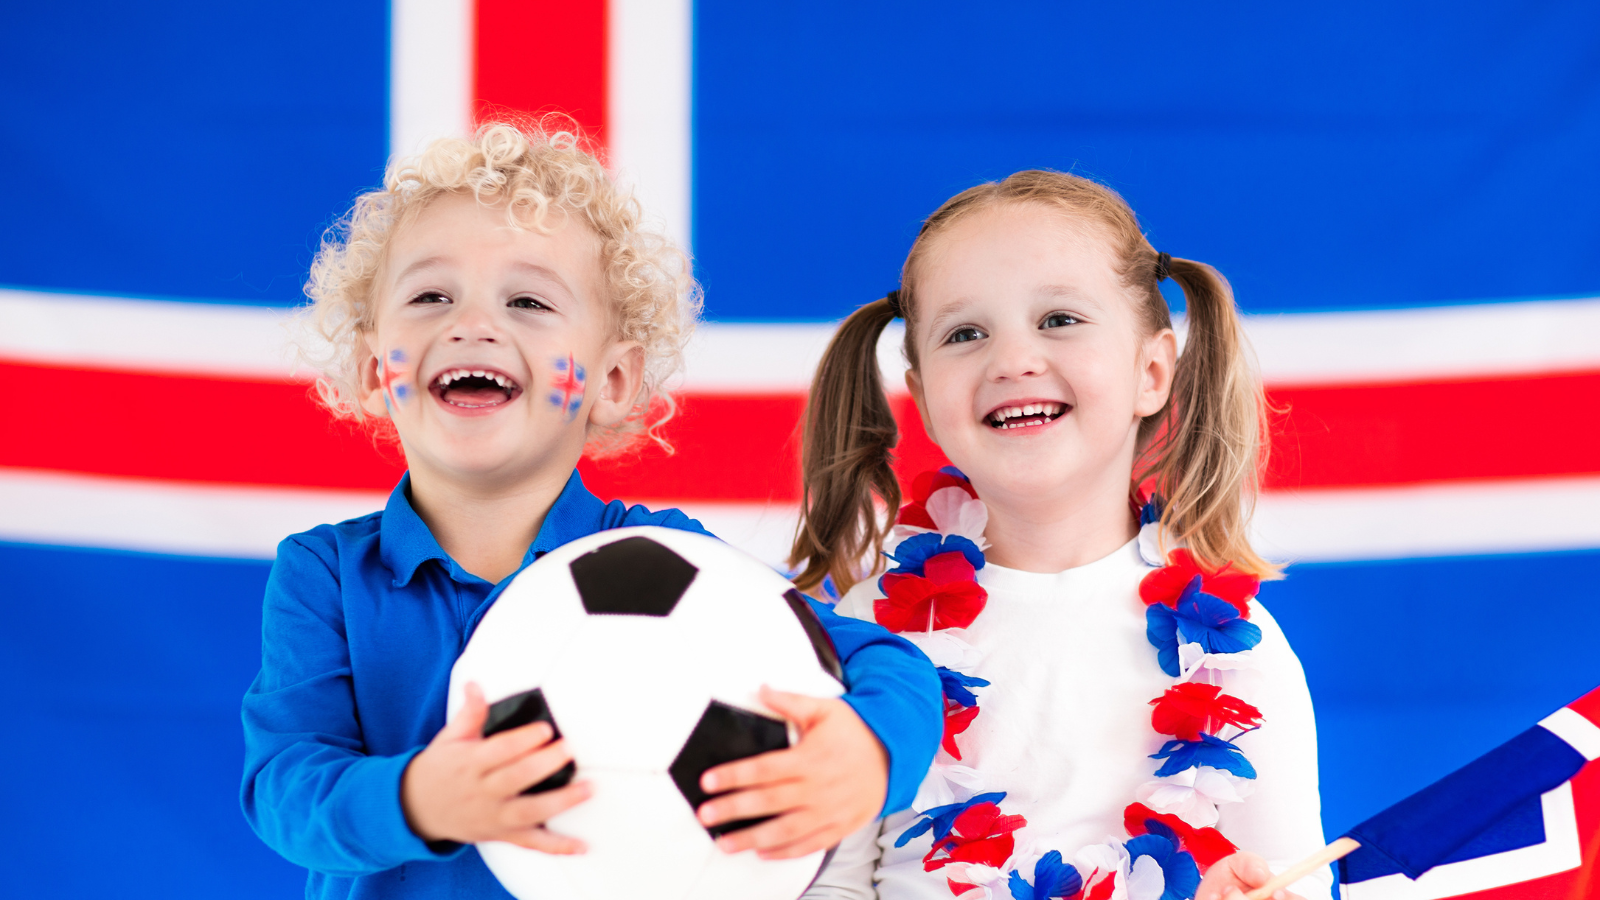  Kids cheering and supporting the Icelandic football team. 